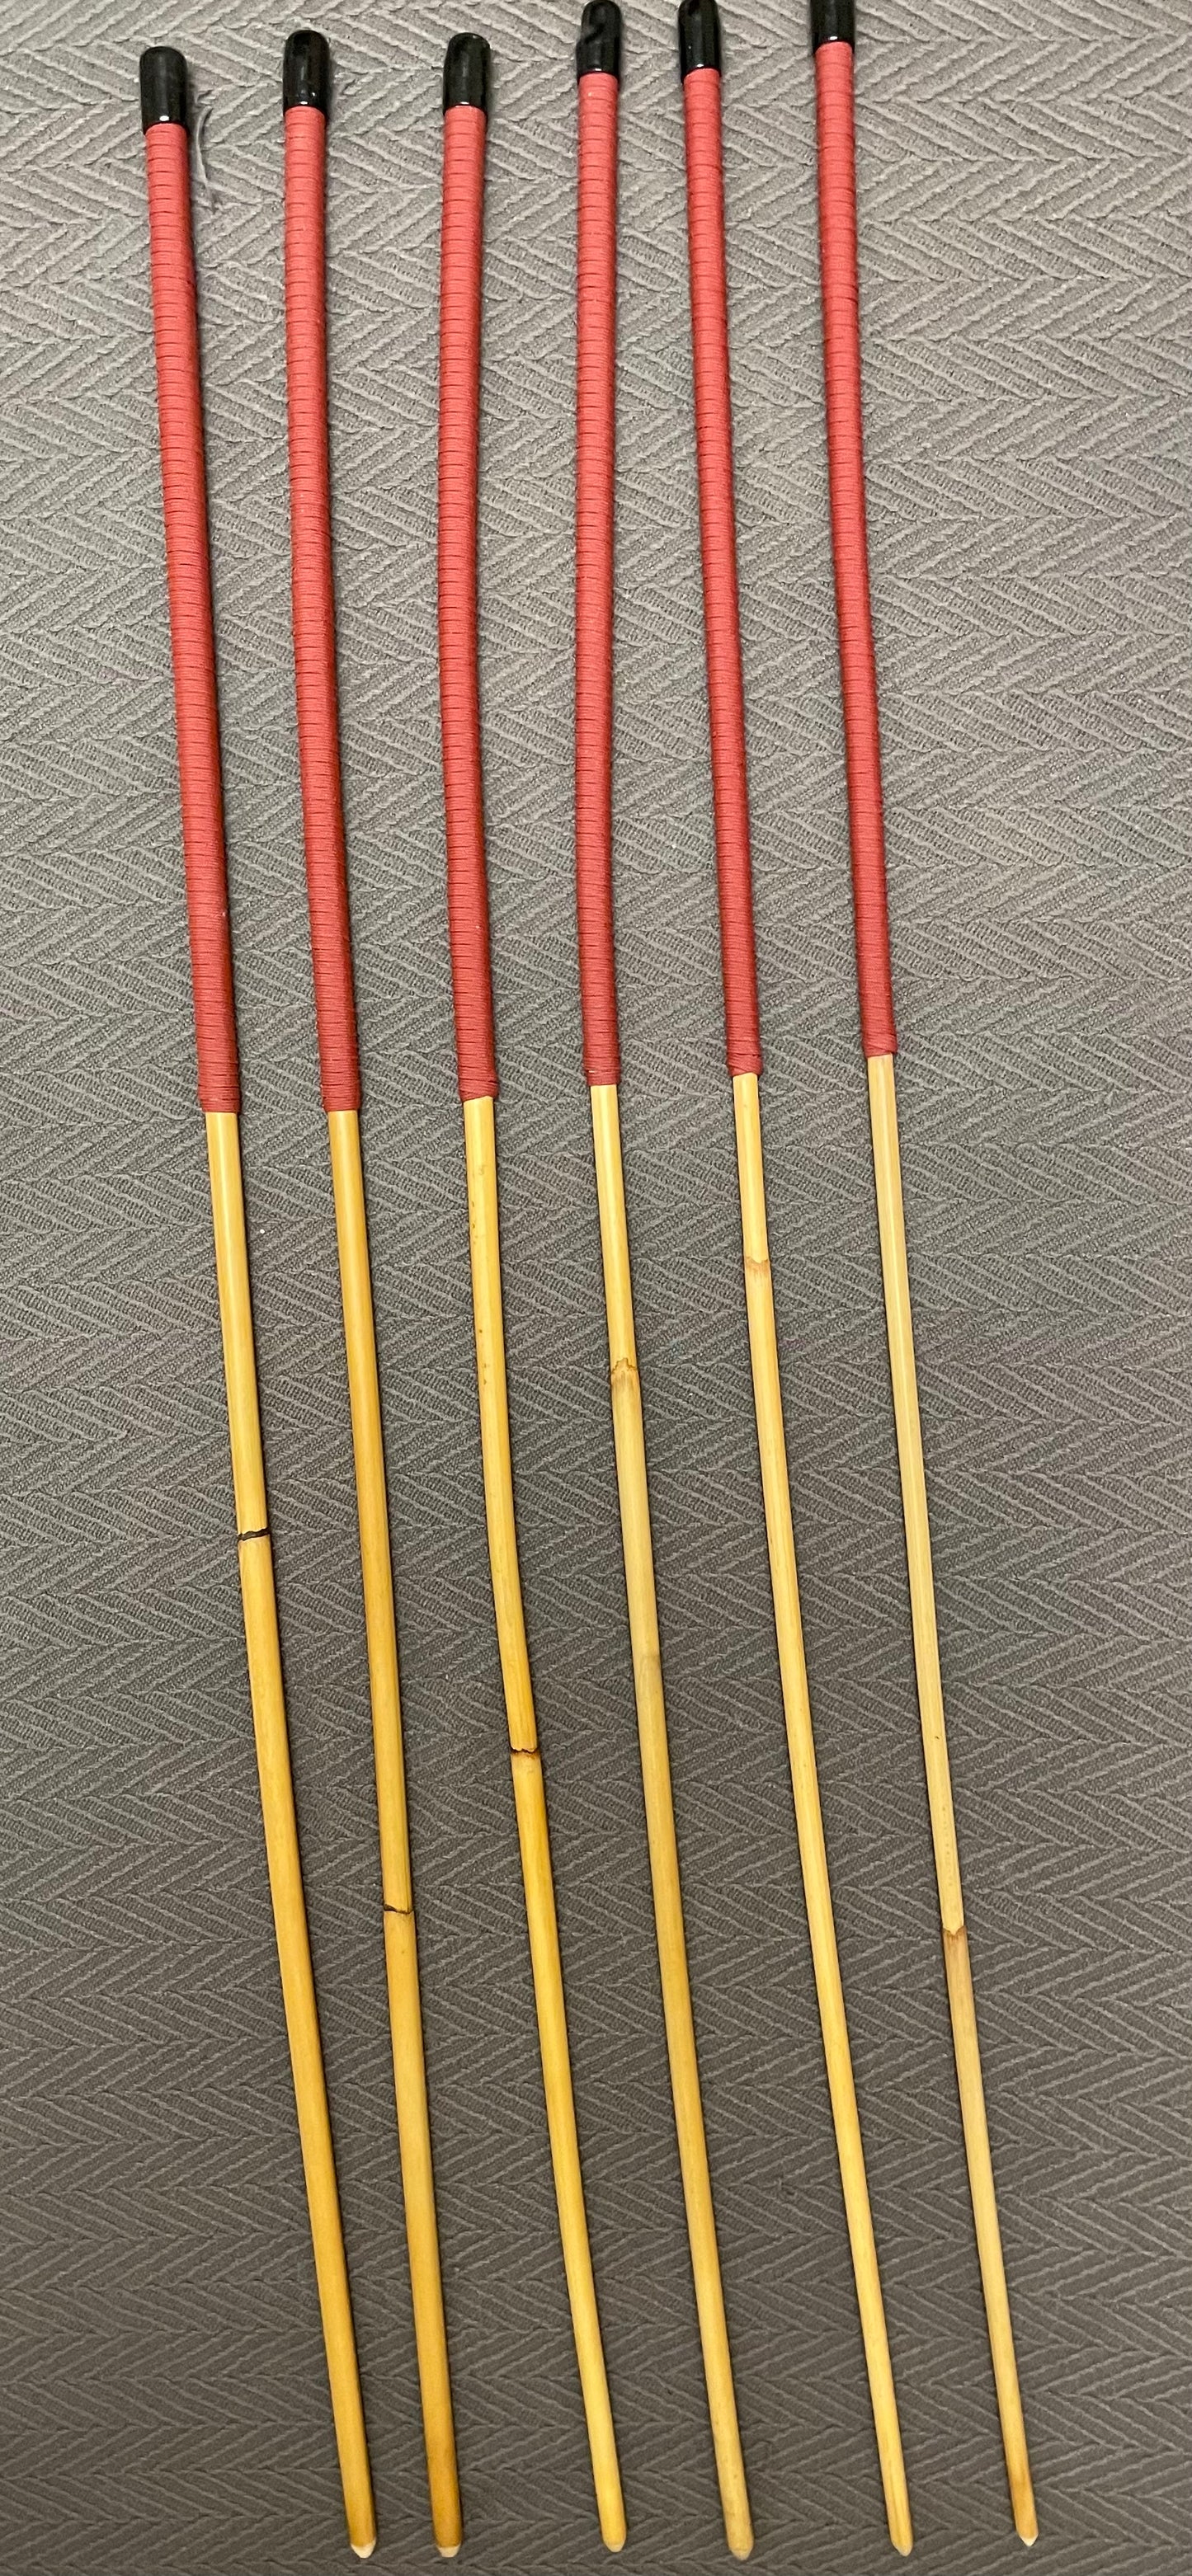 Thick and Thuddy Classic Dragon Canes / Whipping Canes / BDSM Canes Set of 6  - 110 cms Length - BRICK RED Paracord Handles - Englishvice Canes